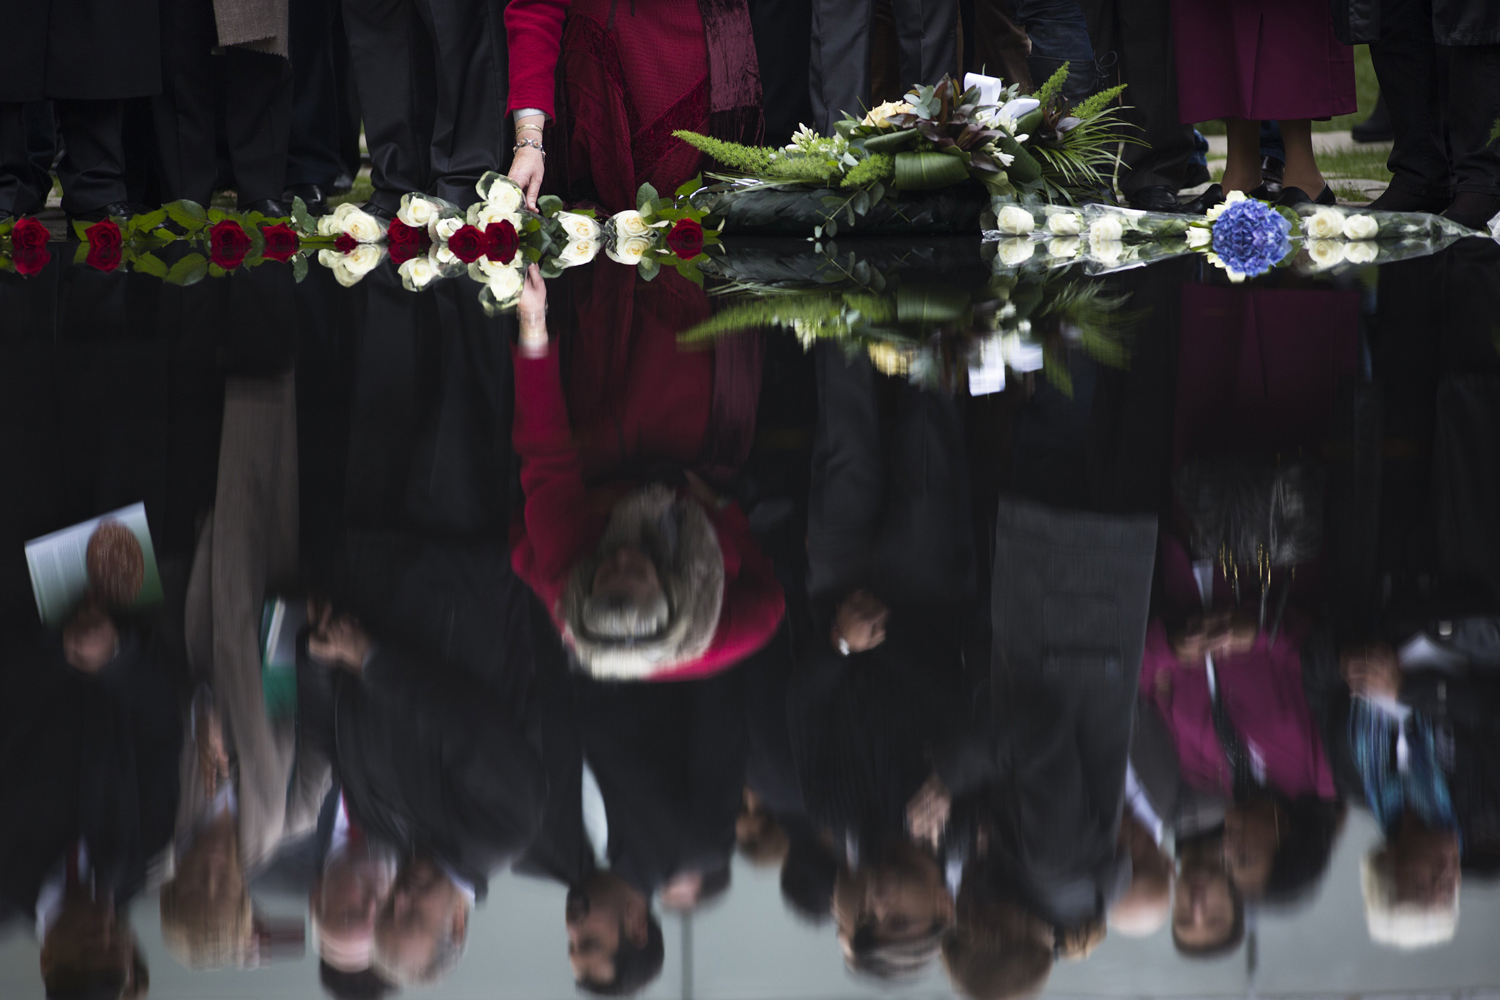 Image: Oct. 24, 2012. People lay flowers during the inauguration of the "Memorial to the Sinti and Roma of Europe Murdered under National Socialism" in Berlin.